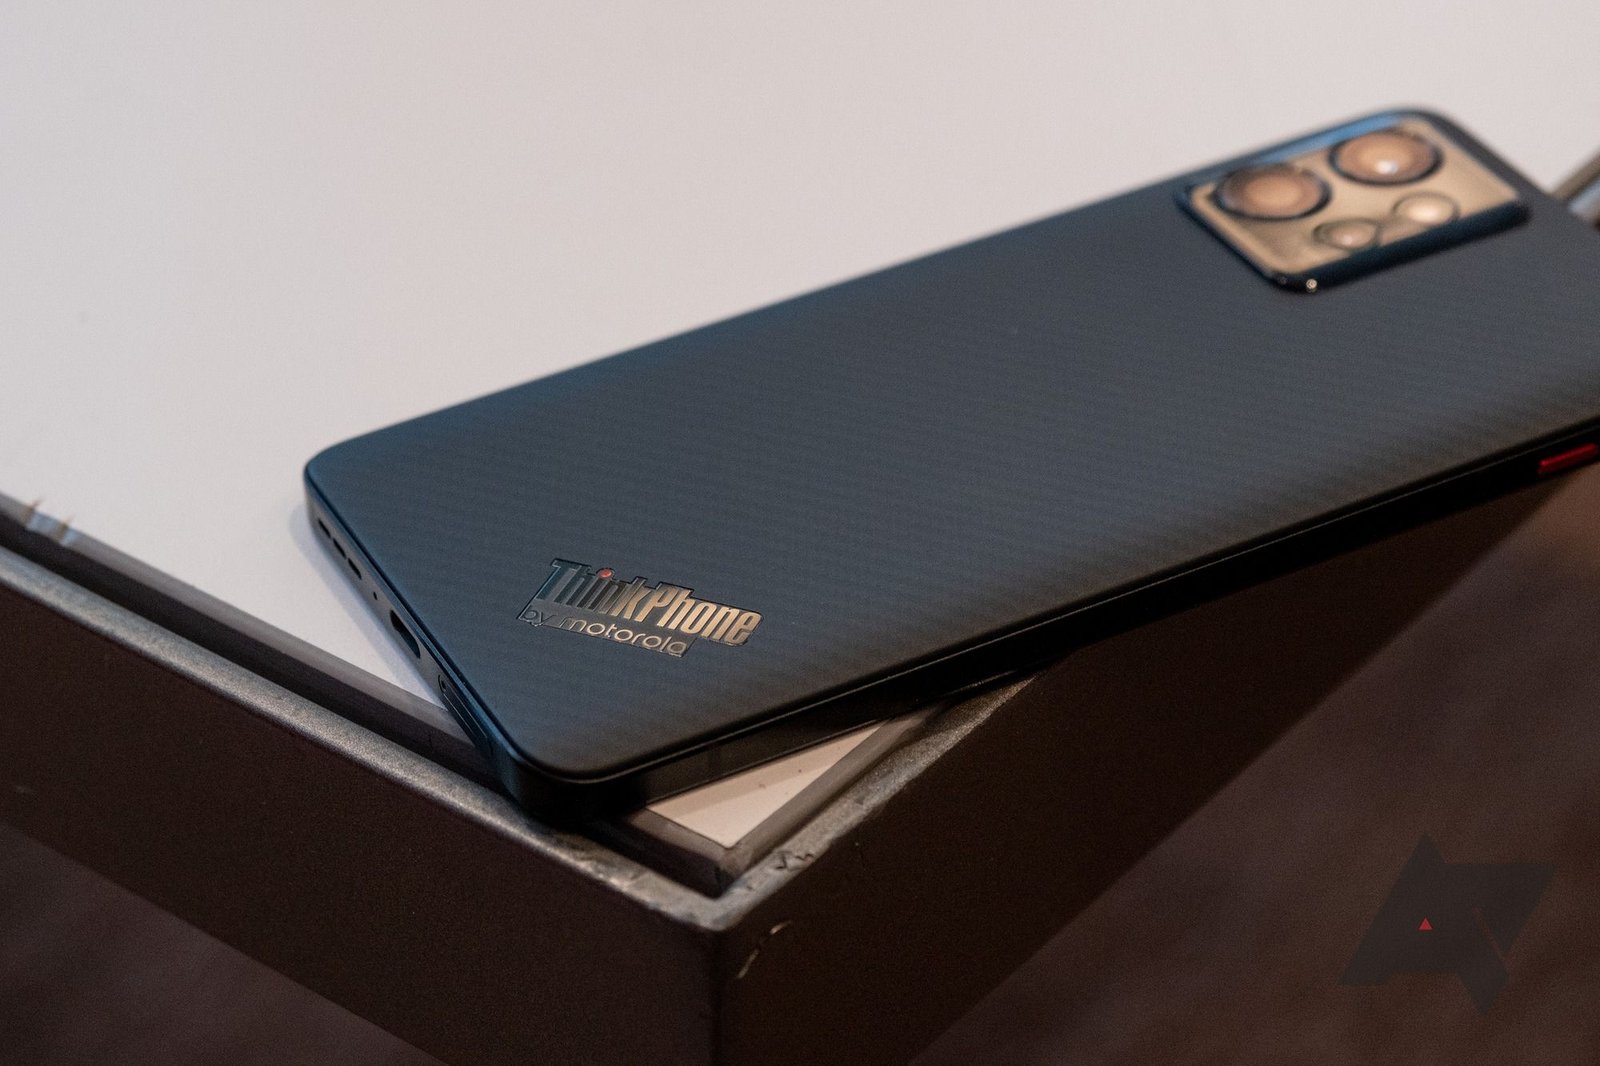 A ThinkPad owner's fantasy is the Lenovo ThinkPhone from Motorola